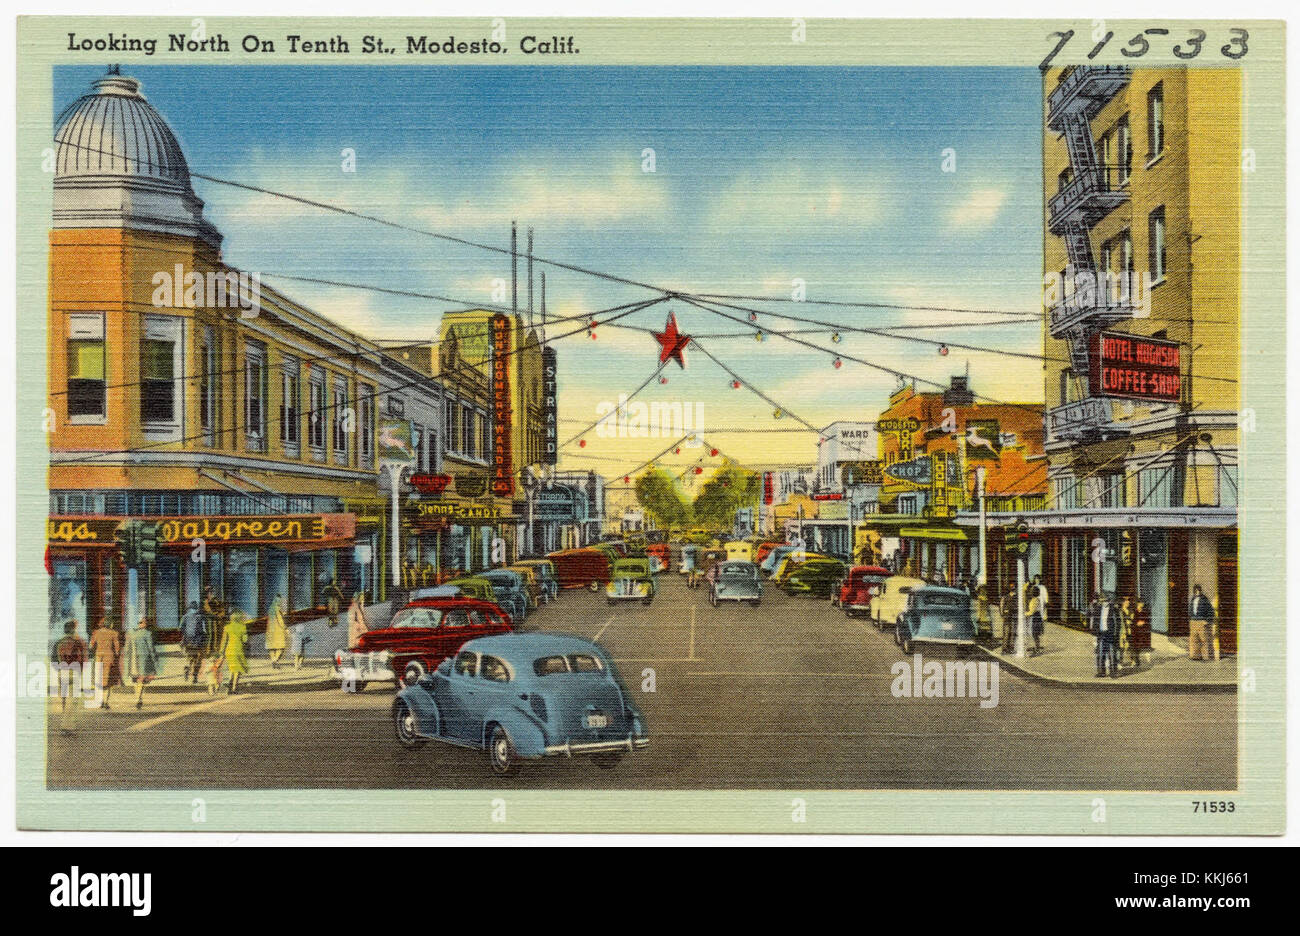 Looking North on Tenth St., Modesto, Calif (71533) Stock Photo